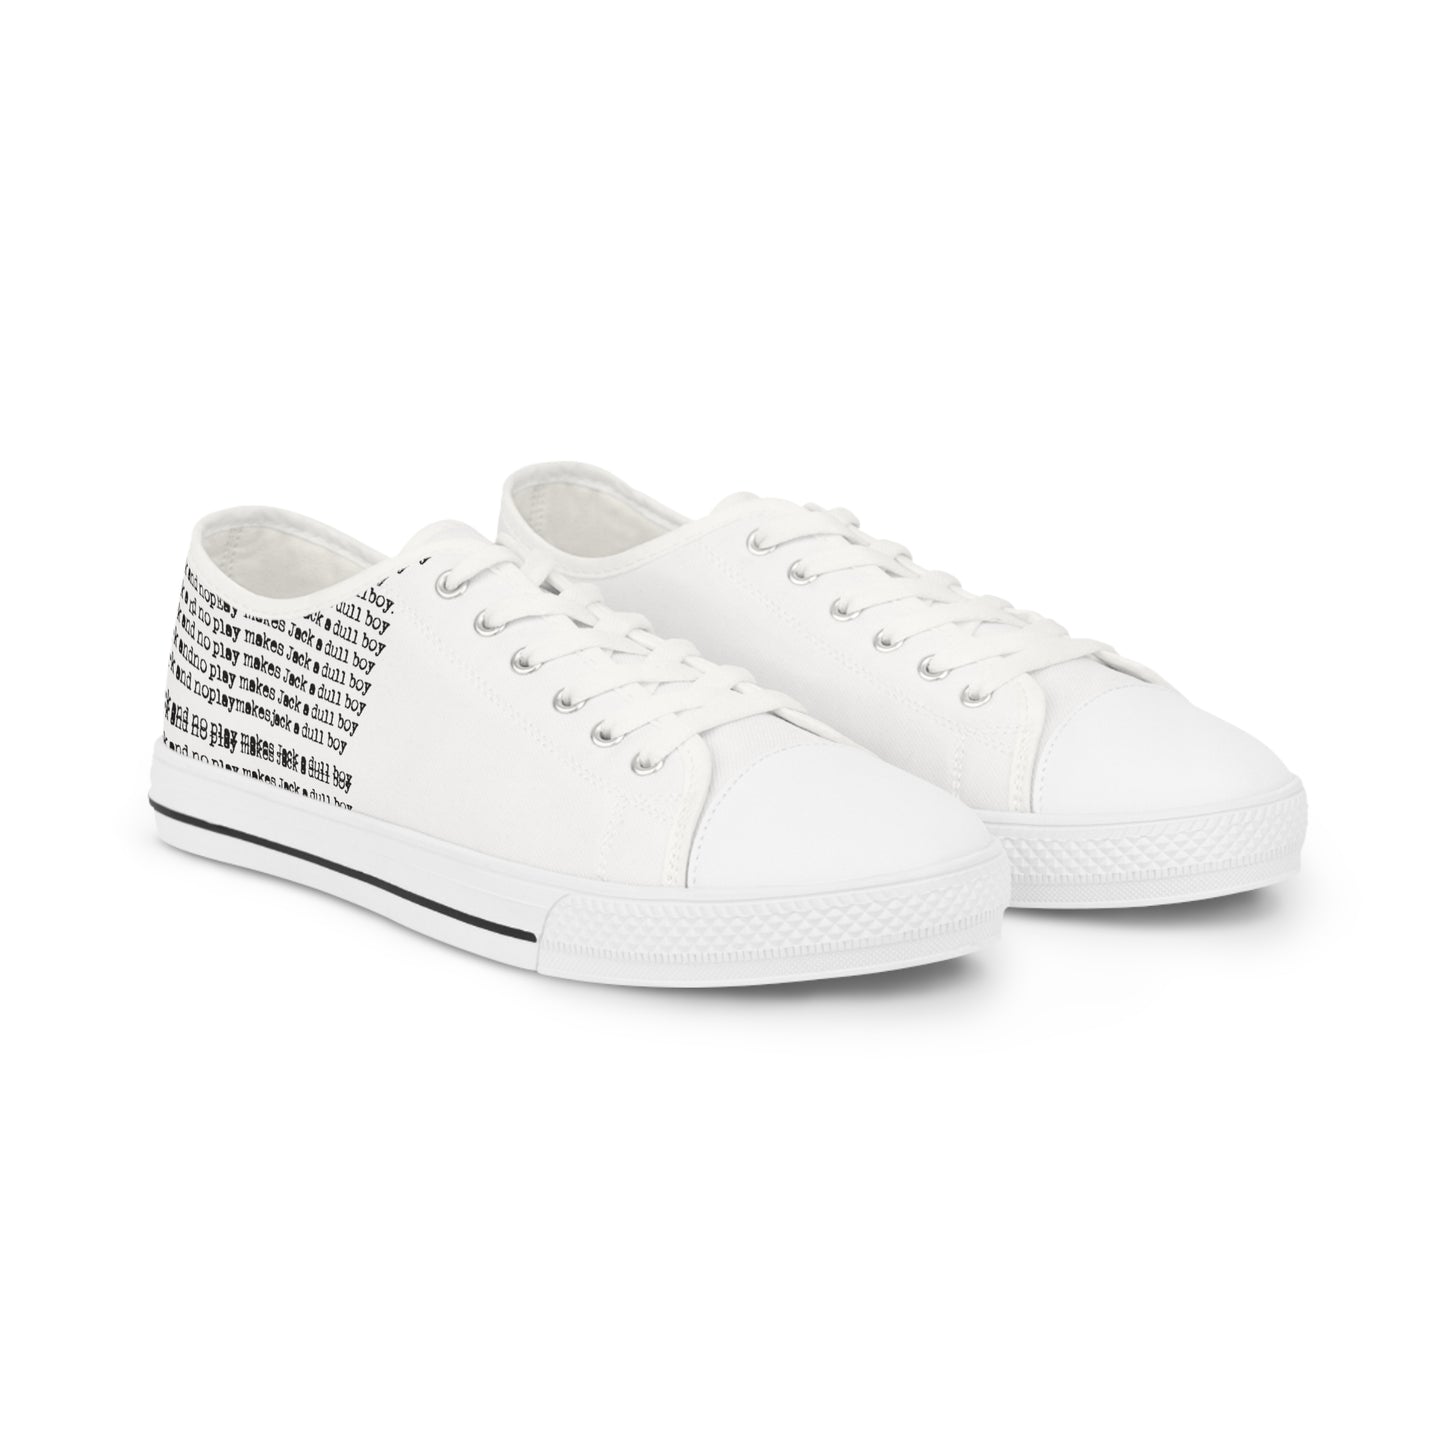 All Work and No Play Men's Low Top Sneakers